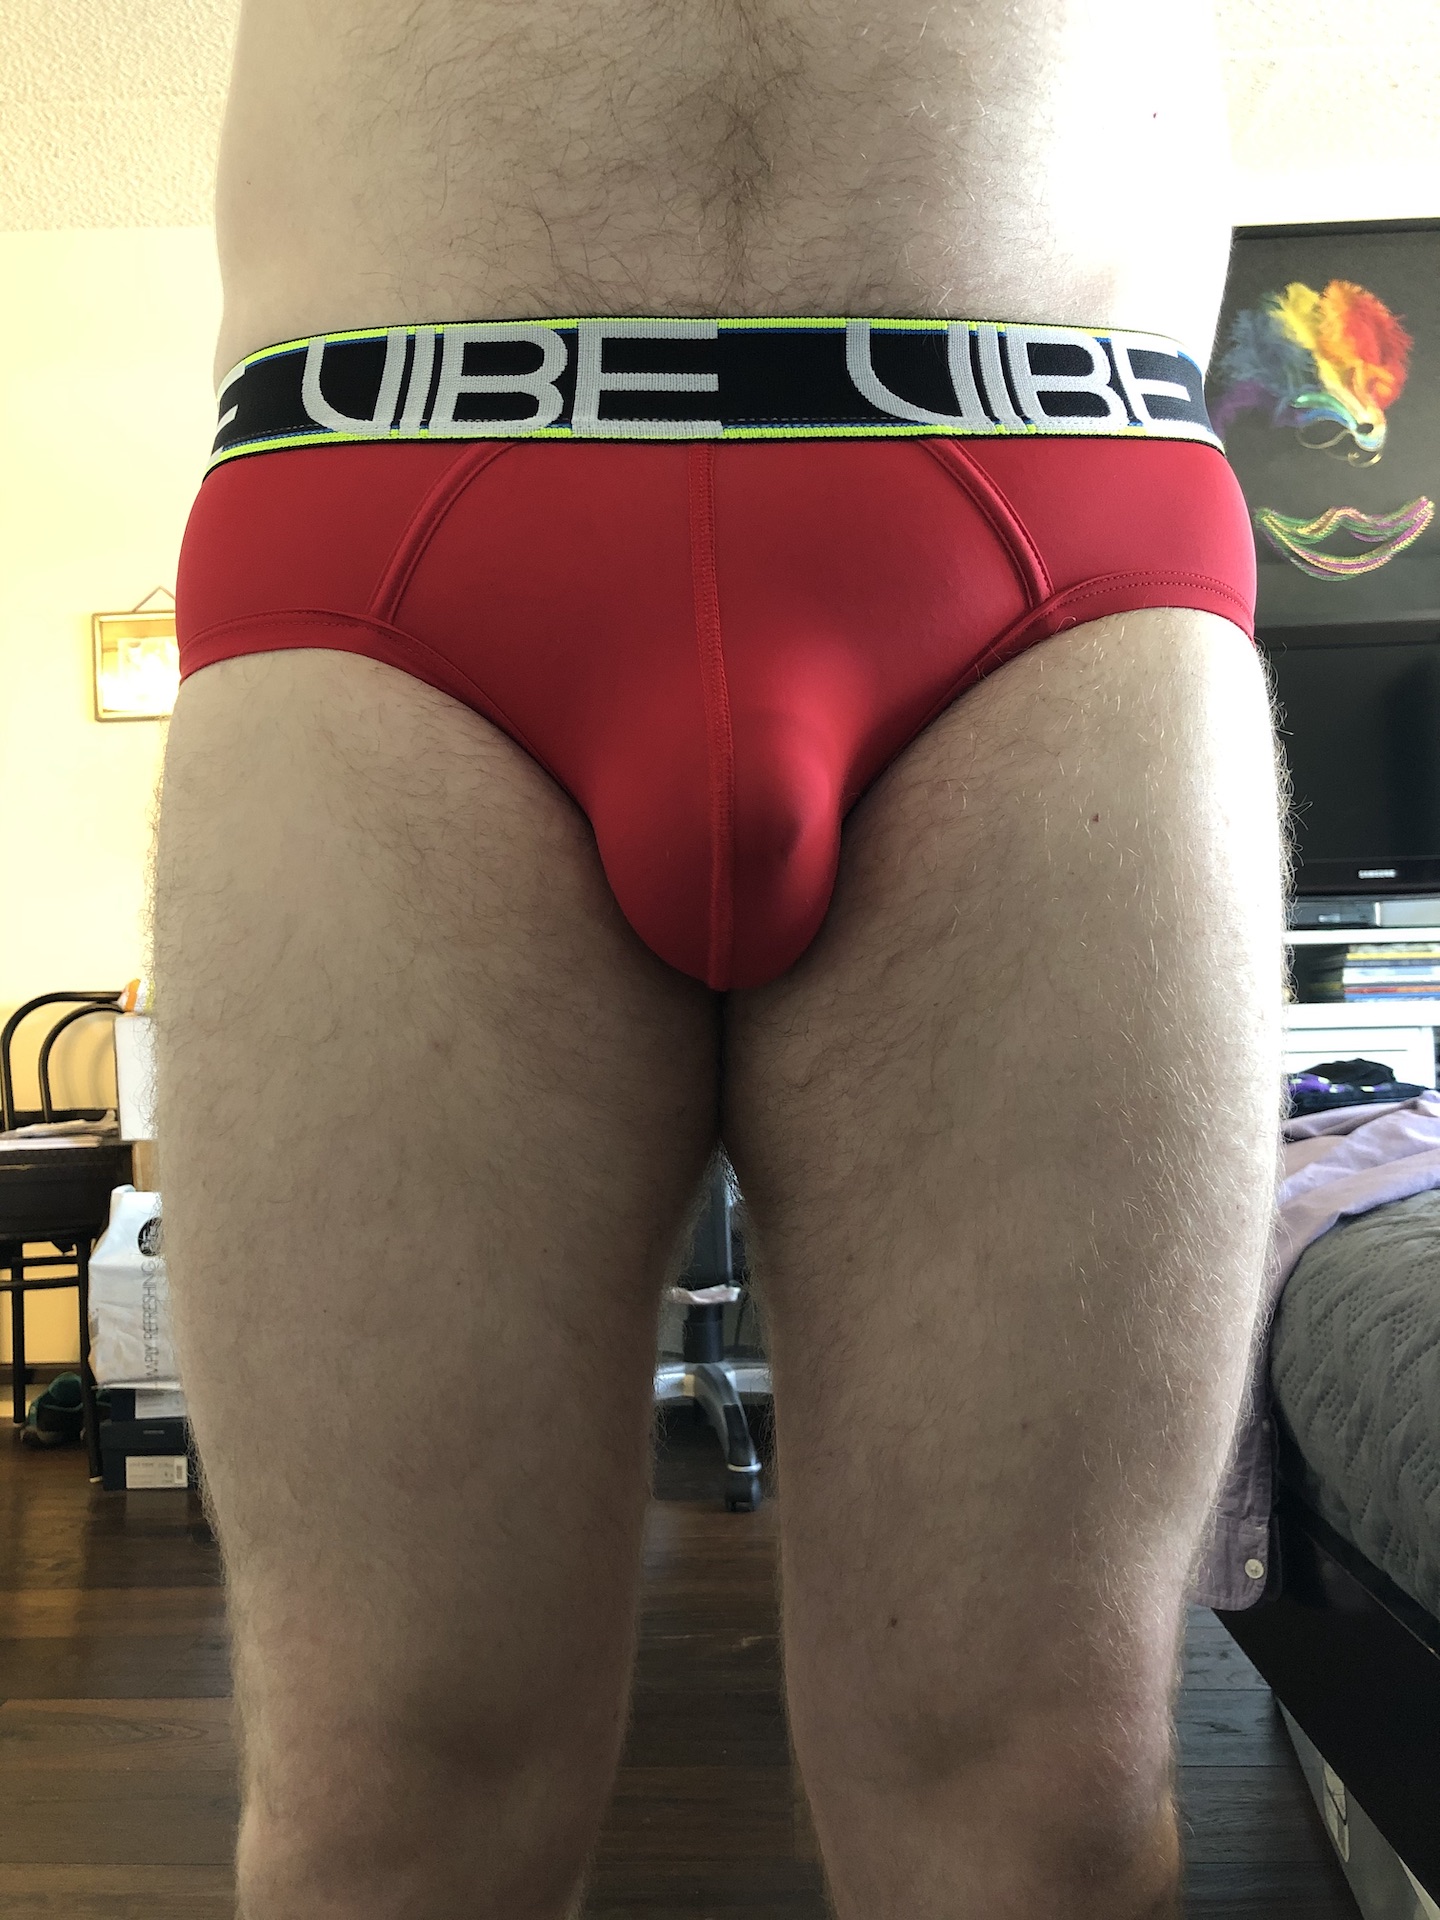 P R I D E Week…at least for my undies…